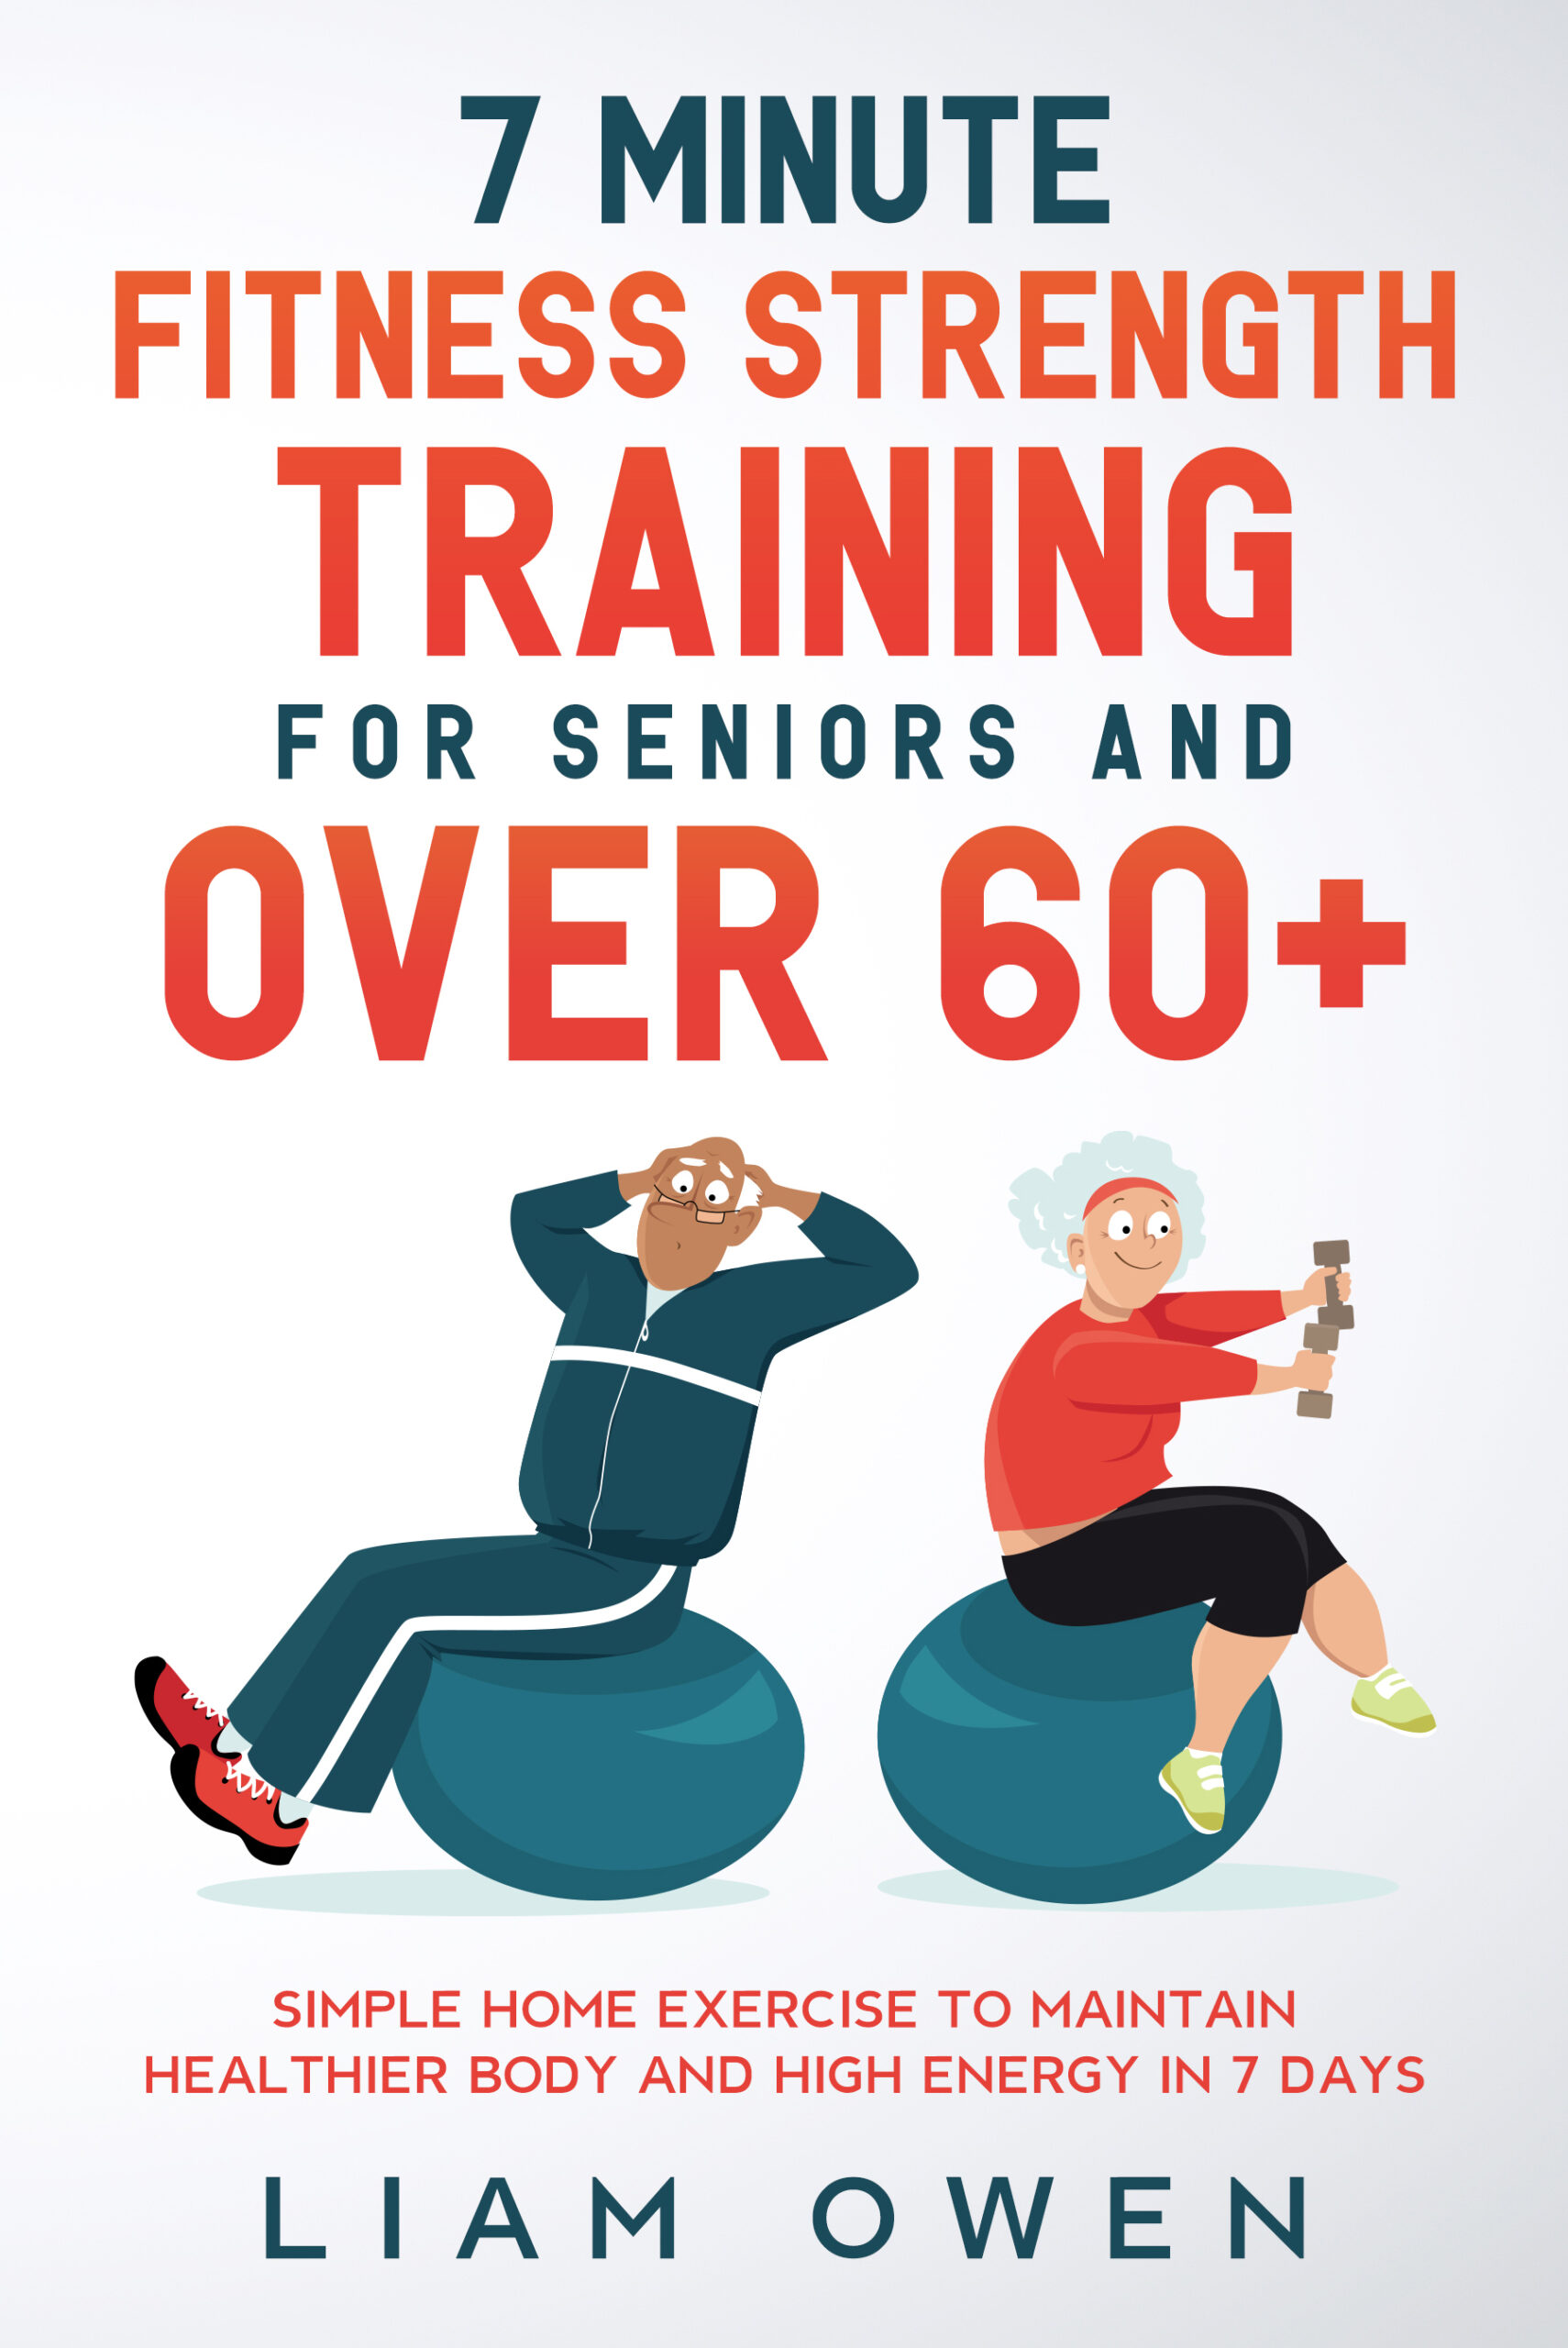 FREE: 7 Minute Fitness Strength Training for Seniors and Over 60+: Simple Home Exercise to Maintain Healthier Body and High Energy in 7 Days by Liam Owen